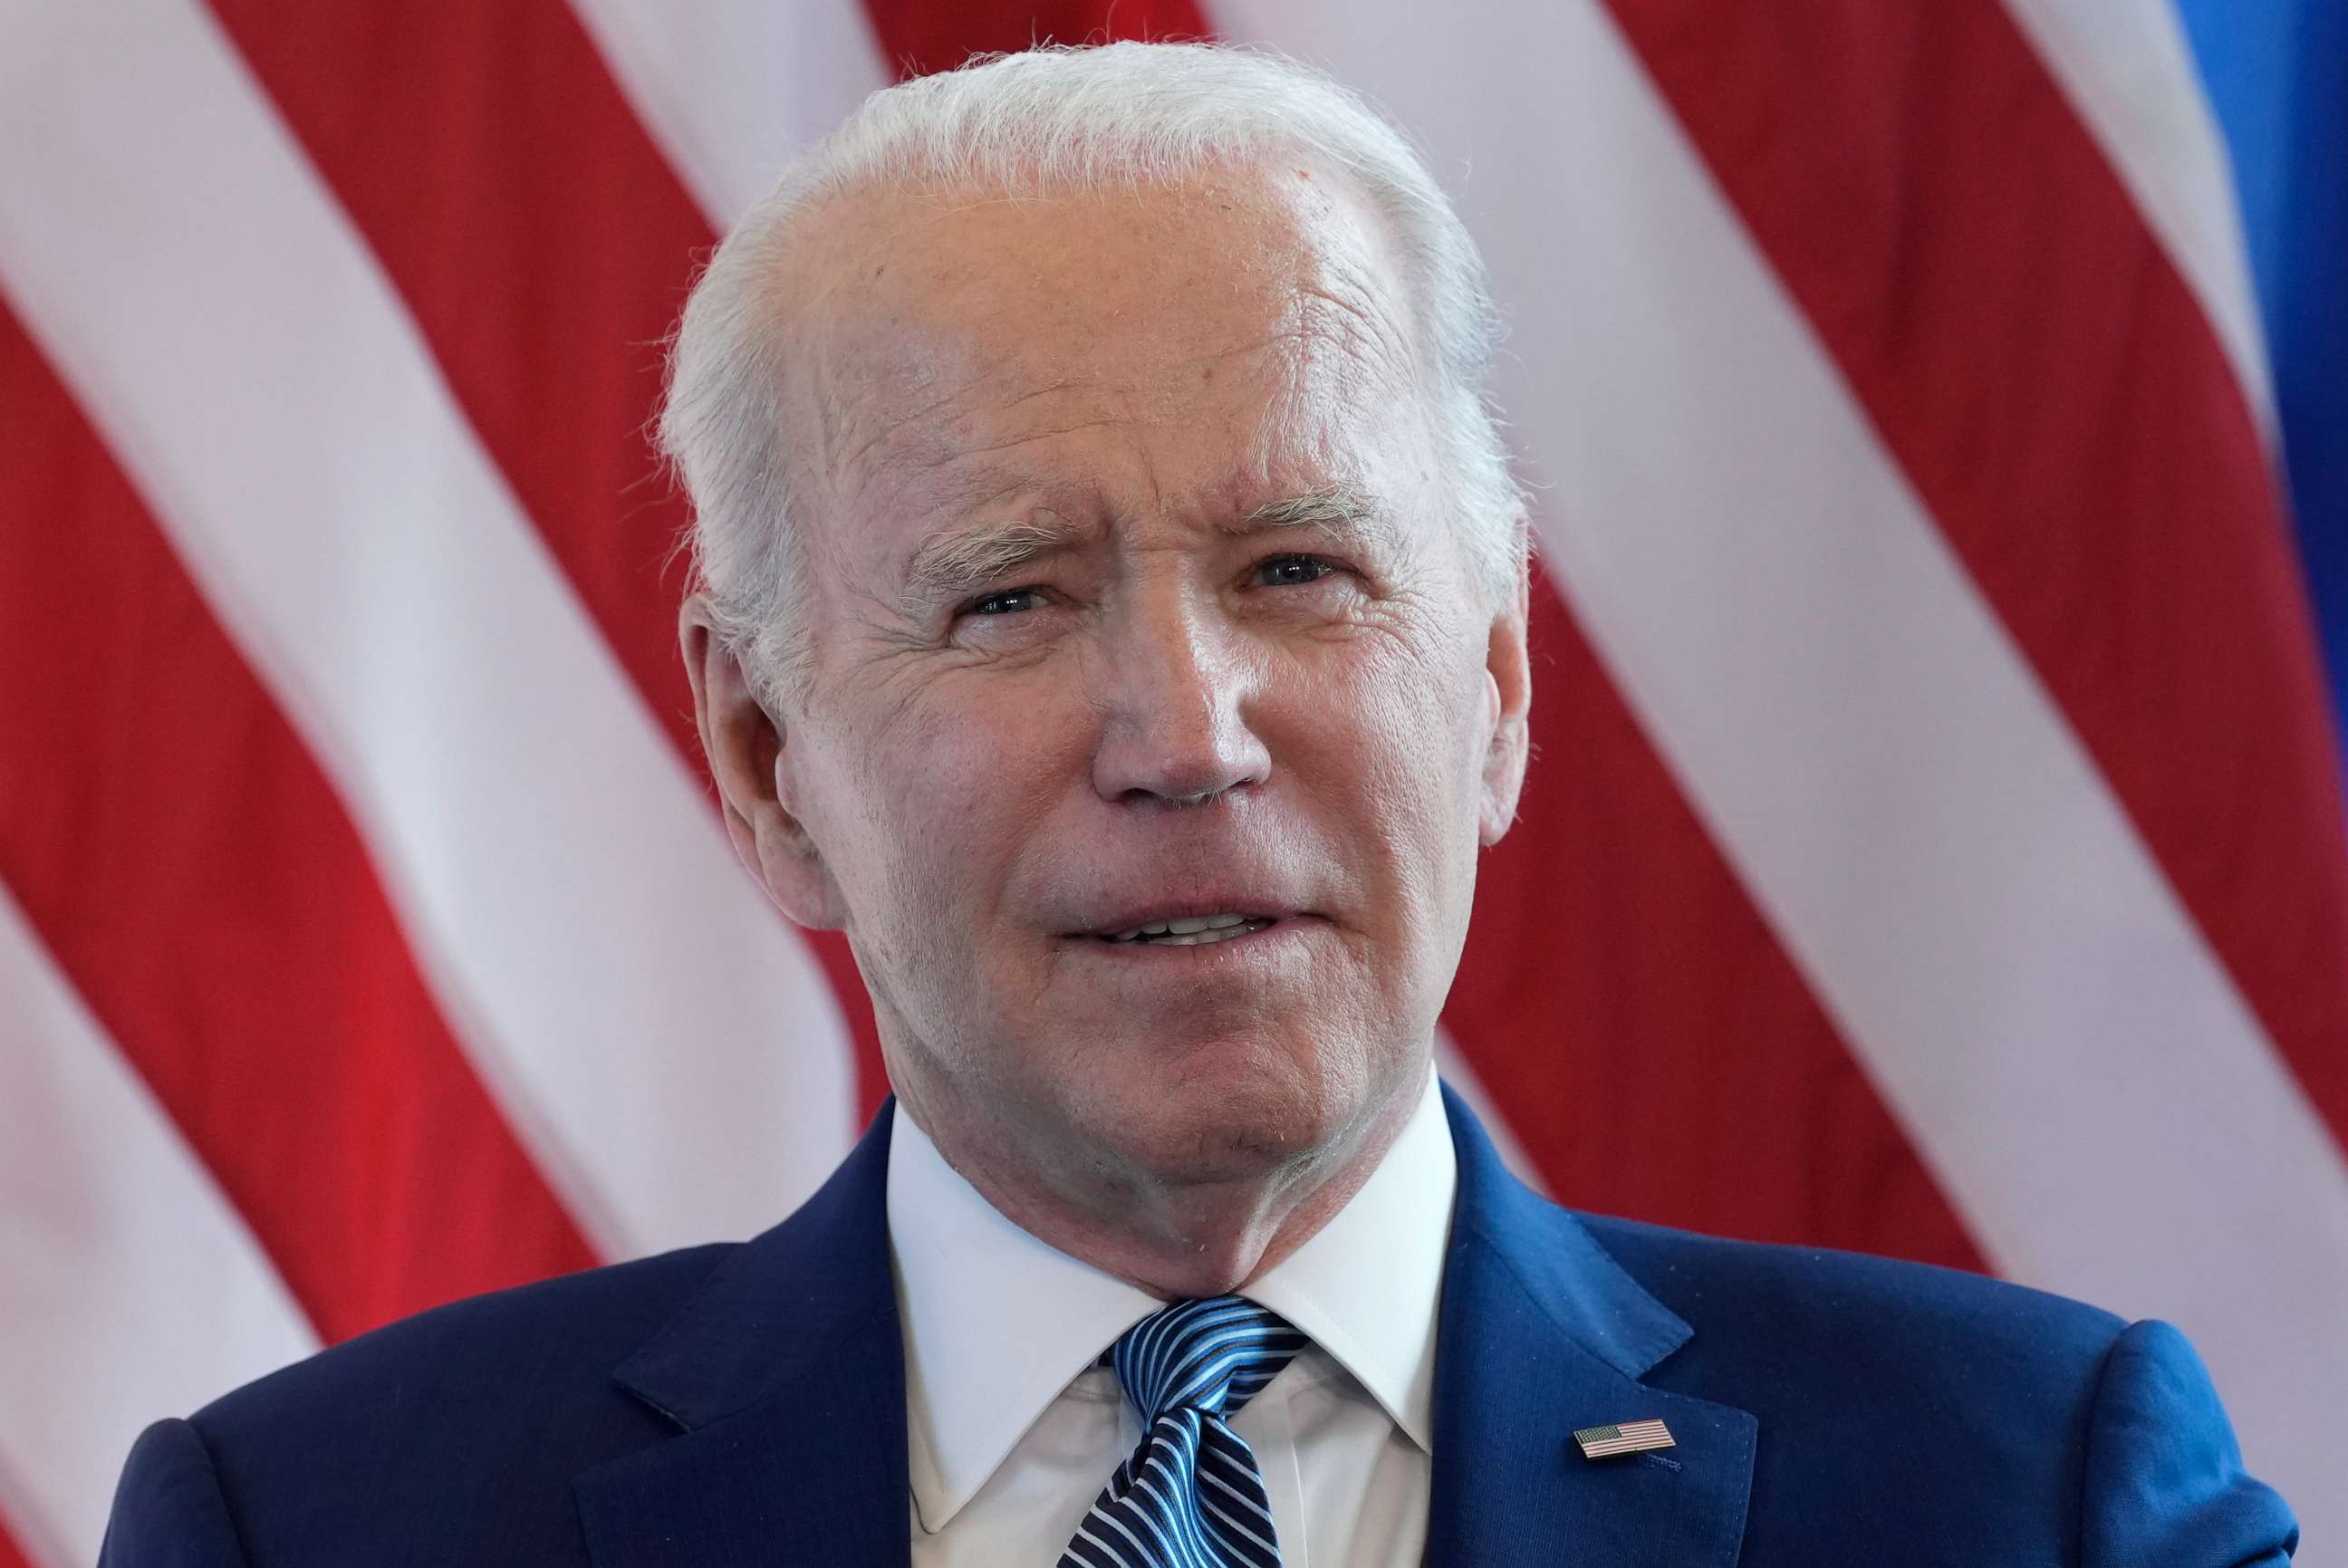 PHOTO: President Joe Biden answers questions on the U.S. debt limits ahead of a bilateral meeting with Australia's Prime Minister Anthony Albanese on the sidelines of the G7 Summit in Hiroshima, Japan, Saturday, May 20, 2023. (AP Photo/Susan Walsh)